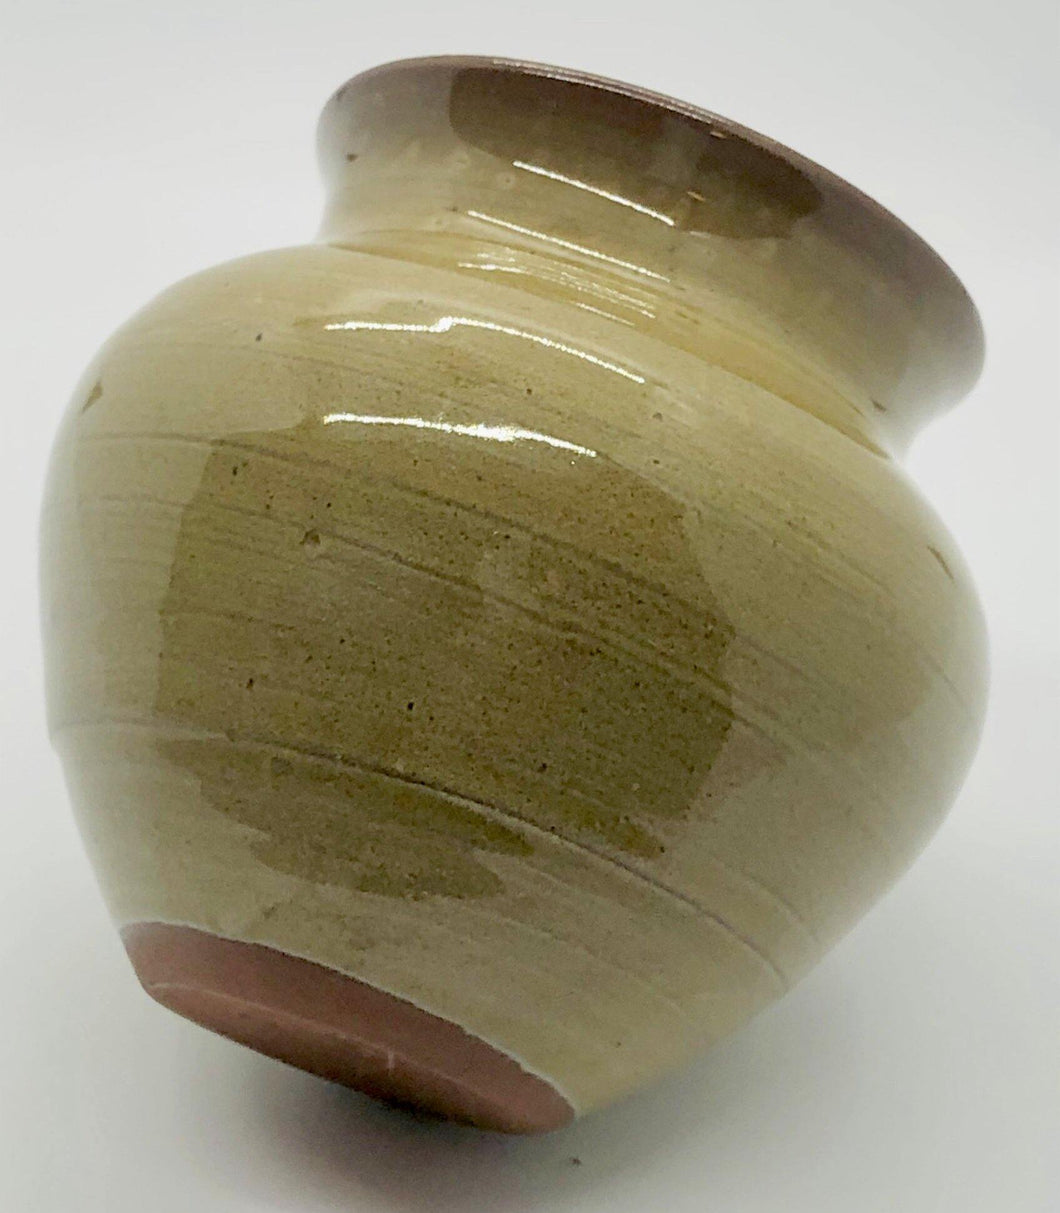 Kim Reilly Ventnor Pottery Studio Vase in Sand and Brown - The Seaview Collection